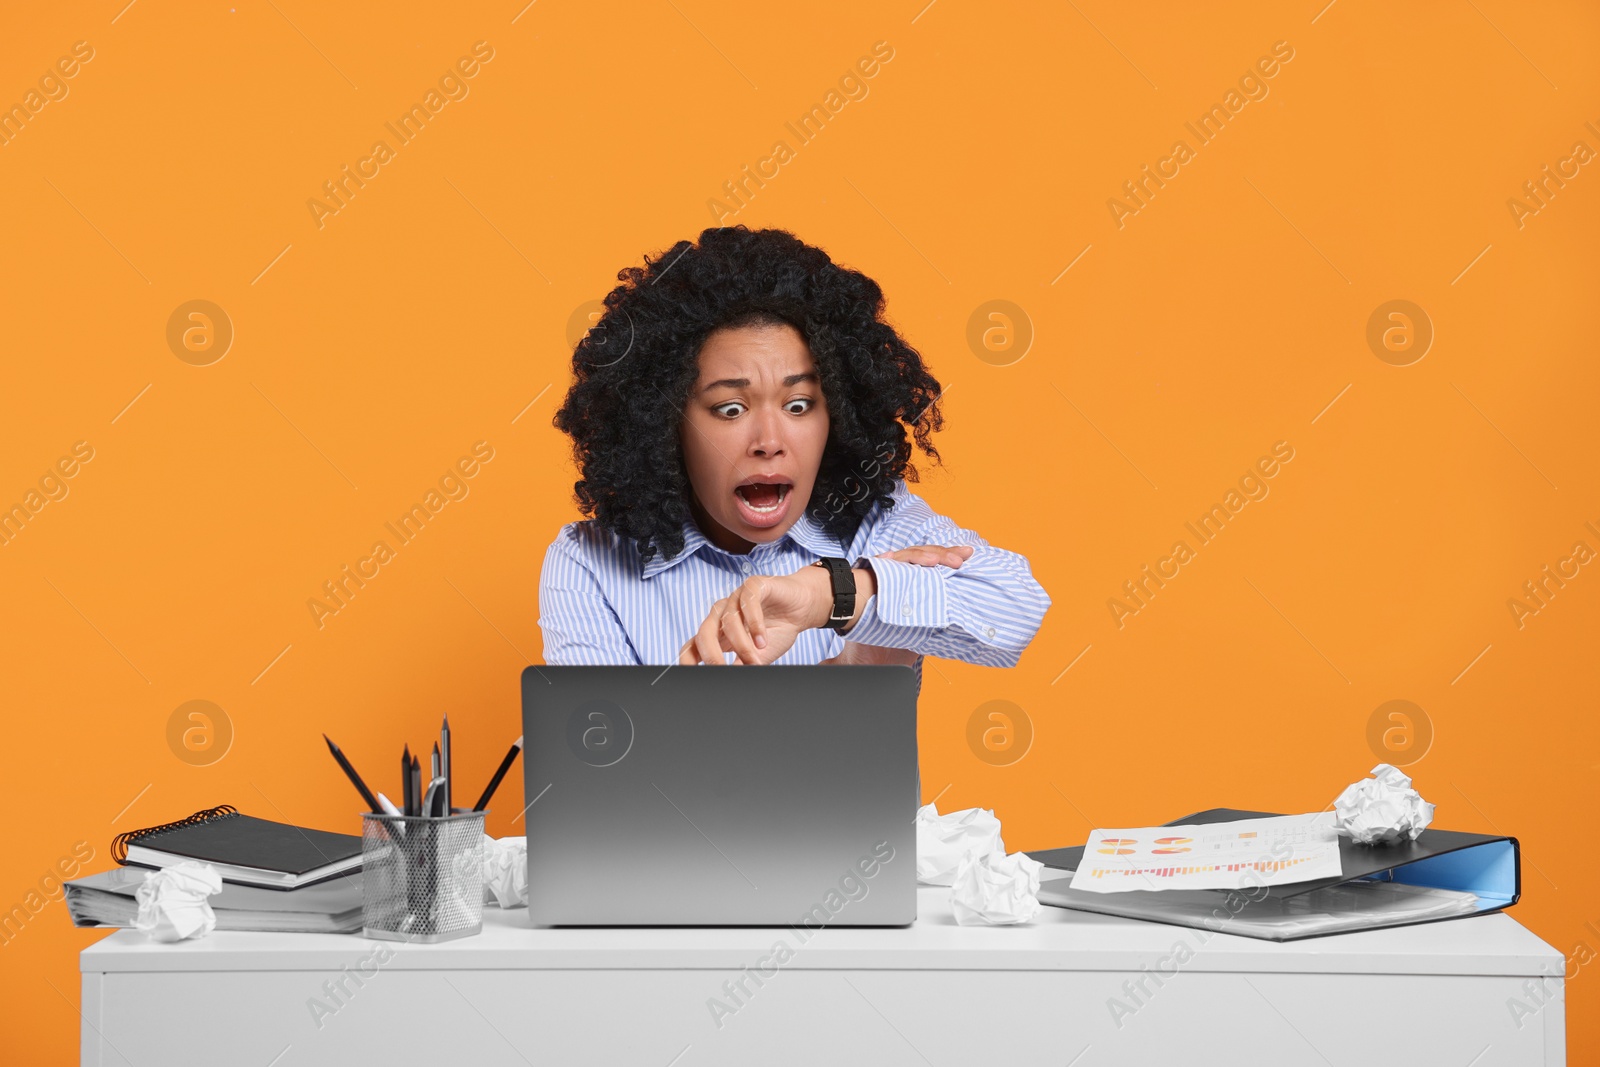 Photo of Stressful deadline. Scared woman checking time on wristwatch at white table against orange background